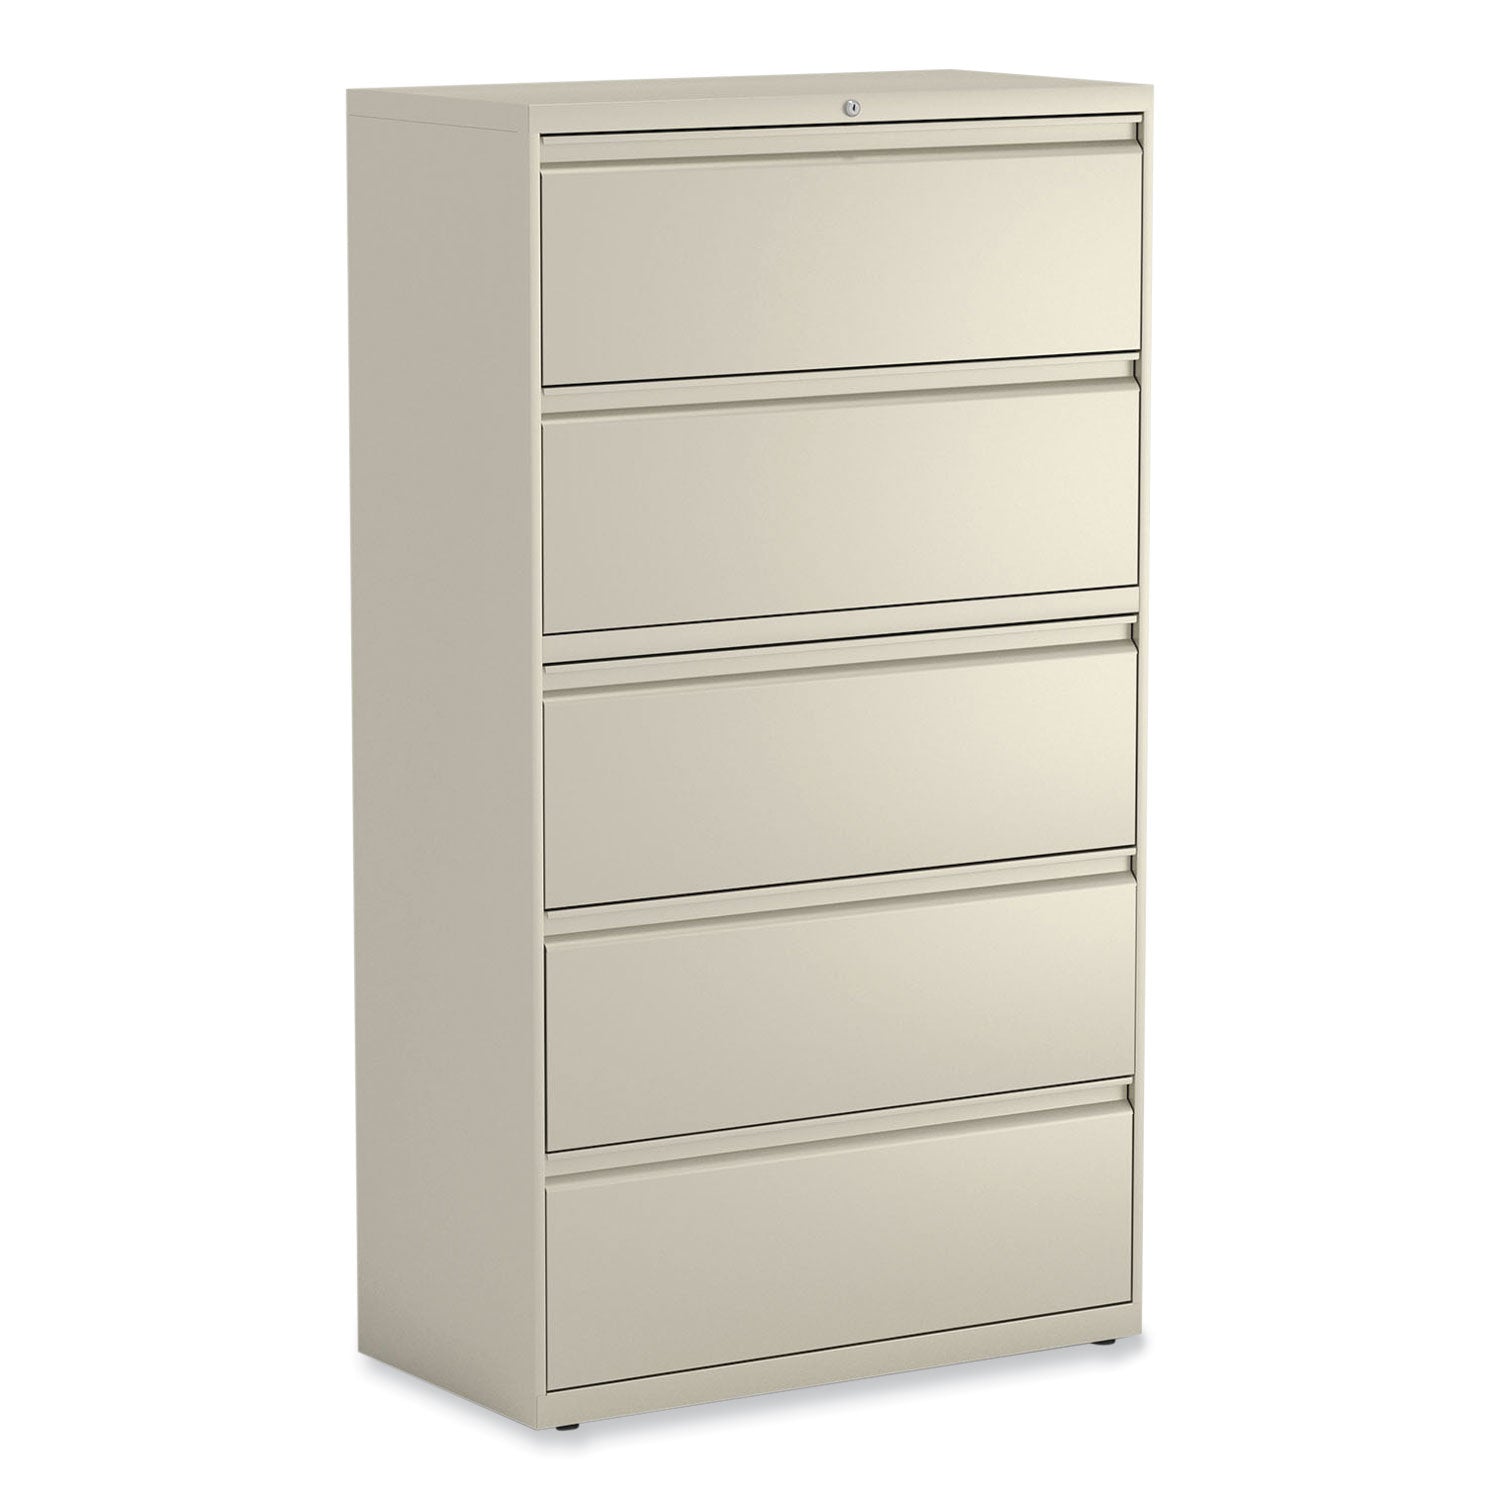 lateral-file-5-legal-letter-a4-a5-size-file-drawers-putty-36-x-1863-x-6763_alehlf3667py - 1